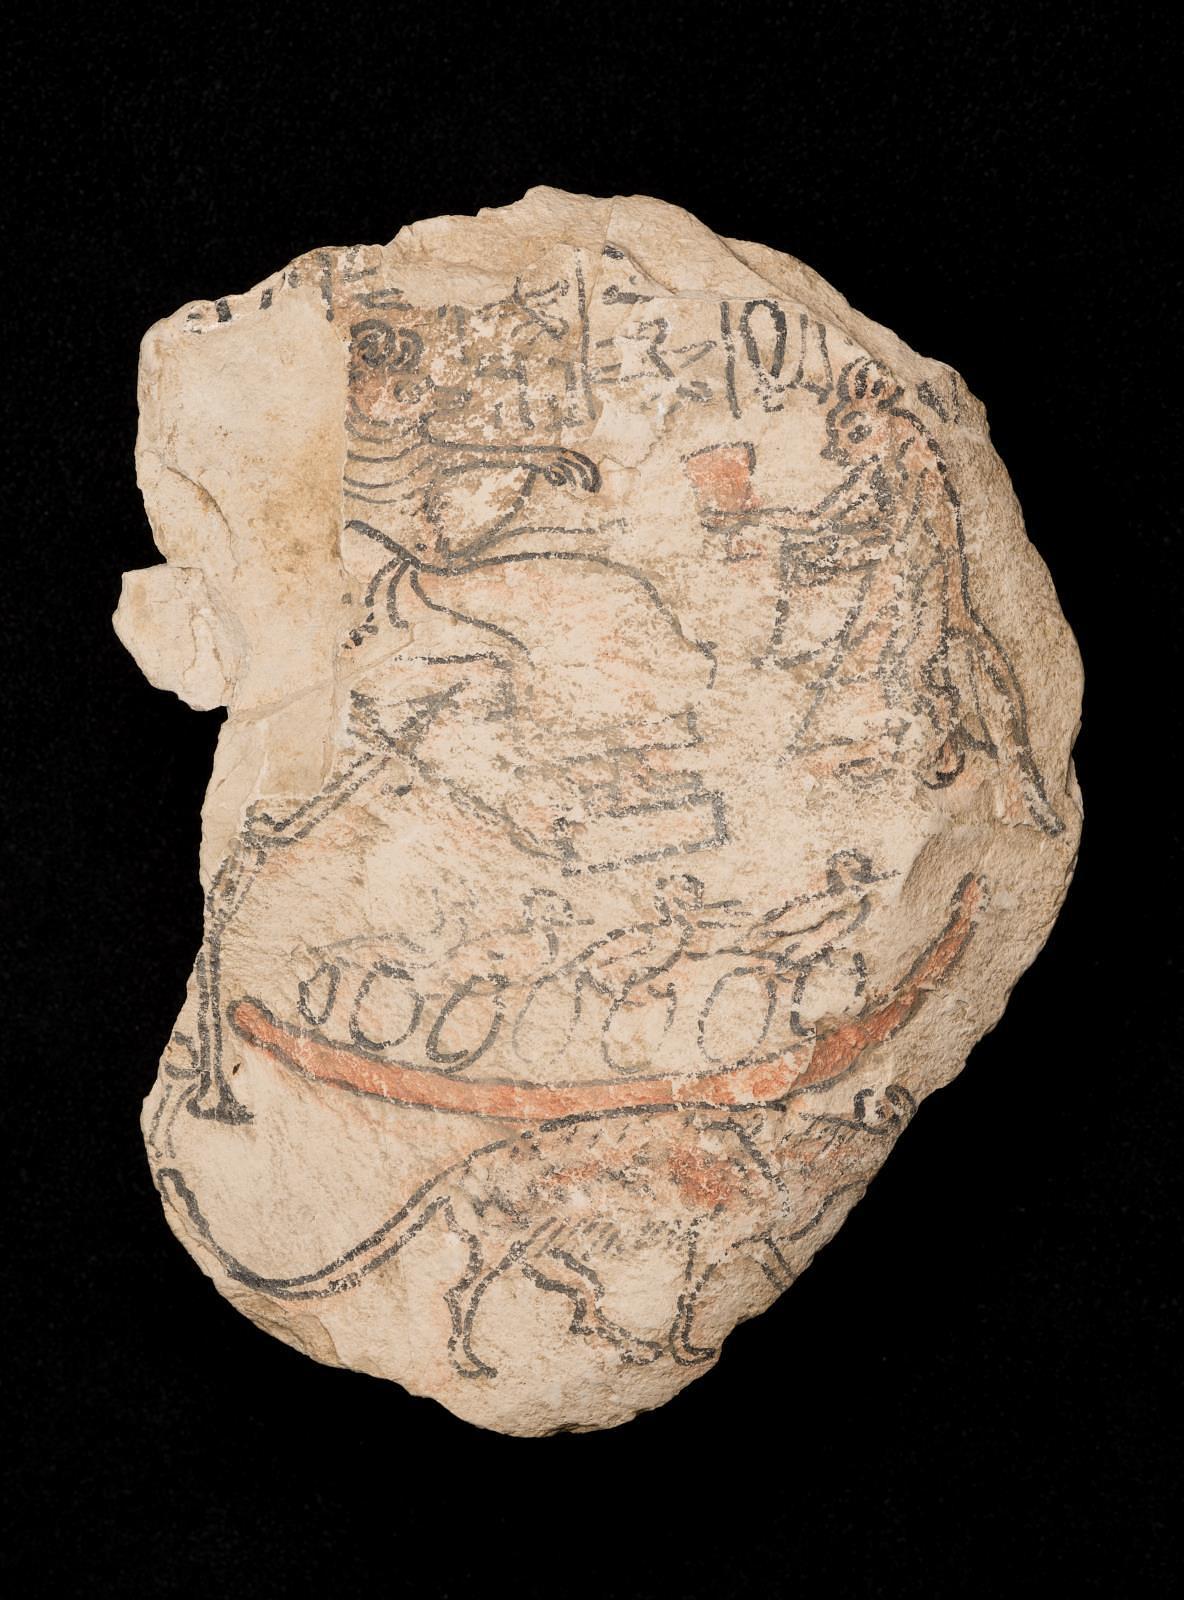 Satirical painted scenes-mouse being waited on by a cat (top) and cat playing nursemaid to a nest full of eggs and fledglings (bottom). Limestone ostracon dated to 1295 - 1070 BC. Ancient Egypt.jpg